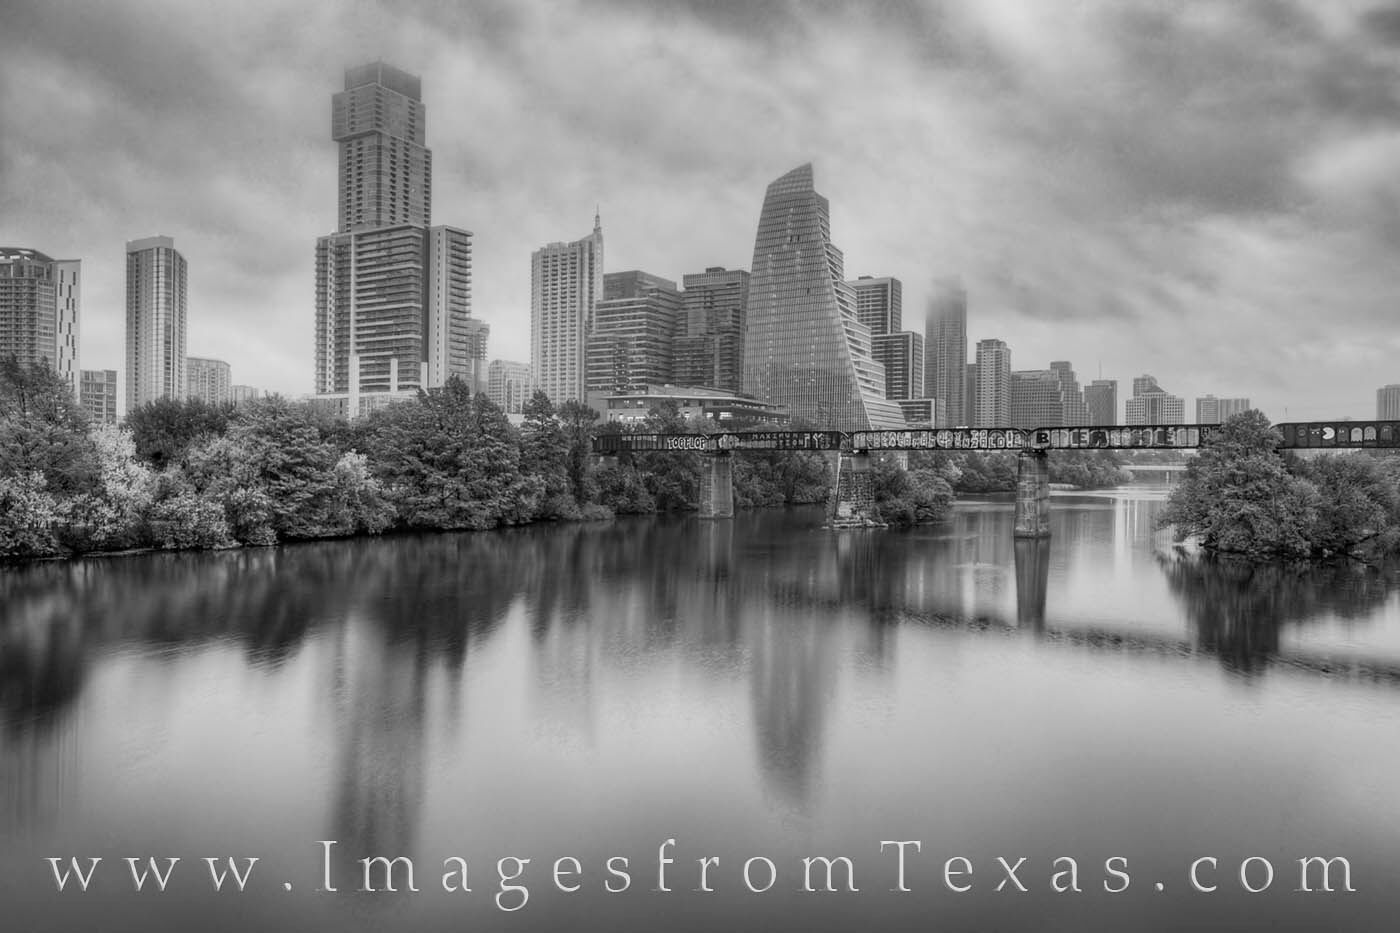 On a foggy morning, the Austin skyline is shrouded in low clouds, making for a moody start to the November day.